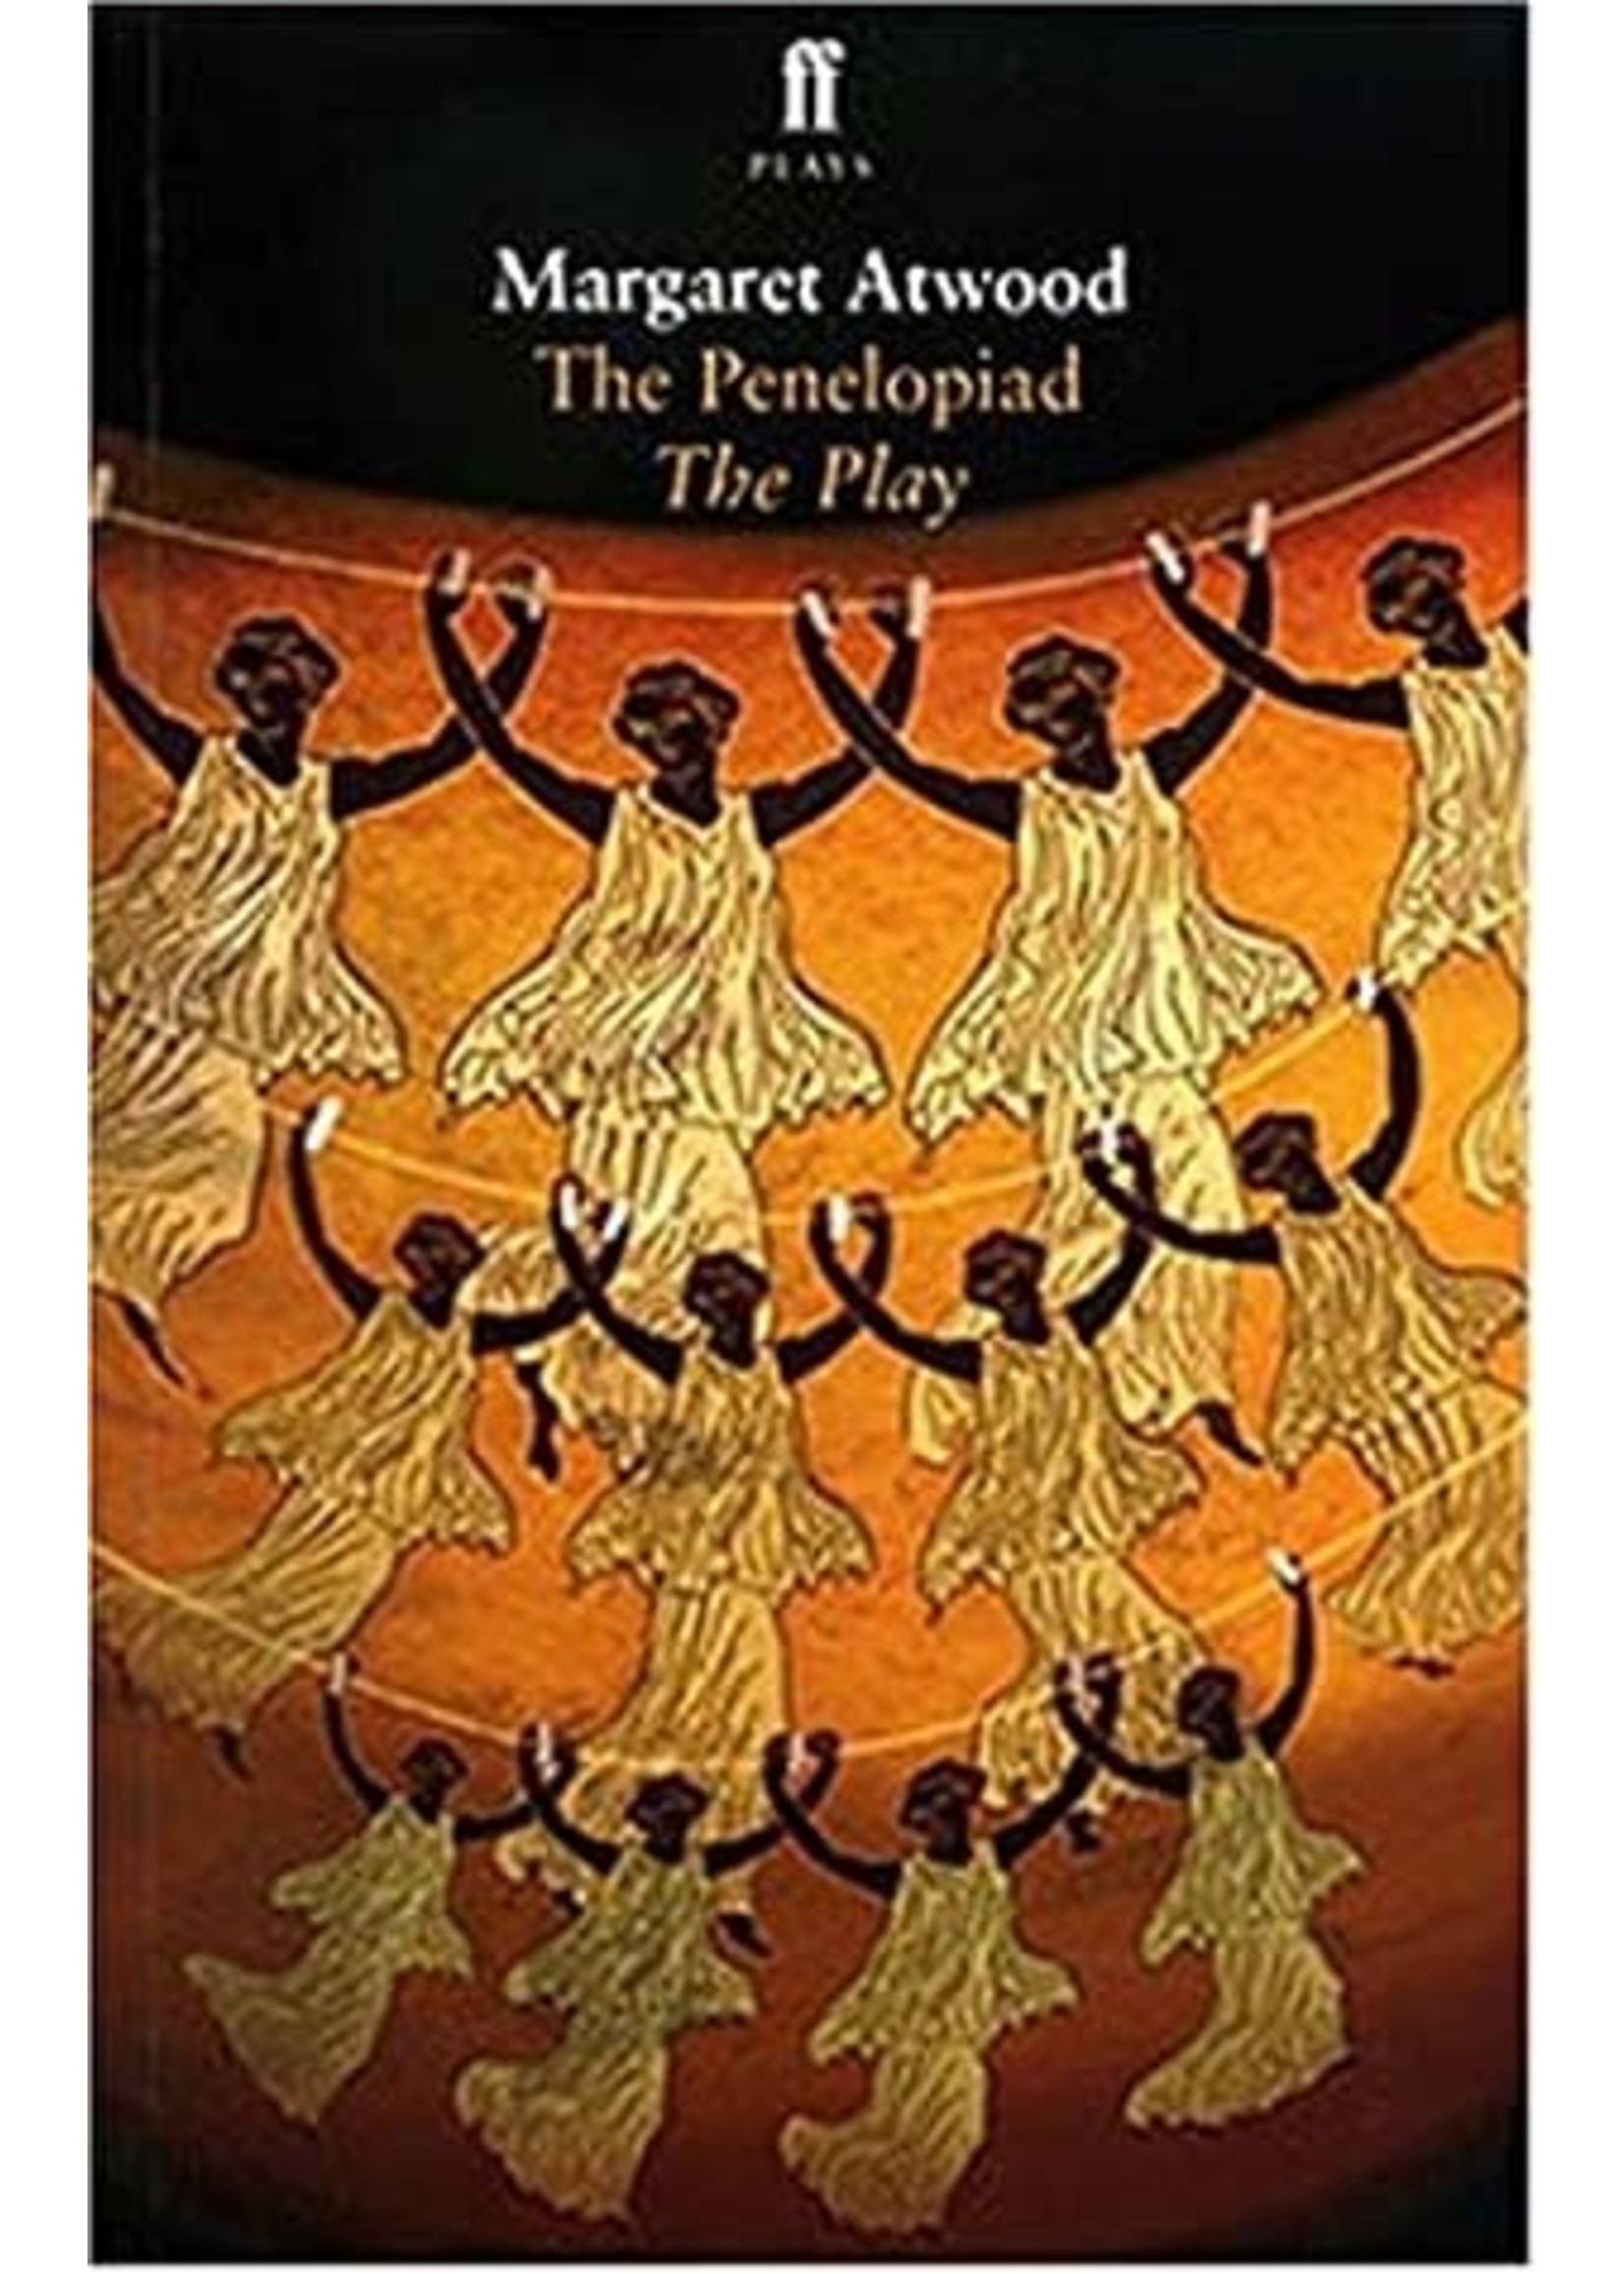 The Penelopiad: The Play by Margaret Atwood